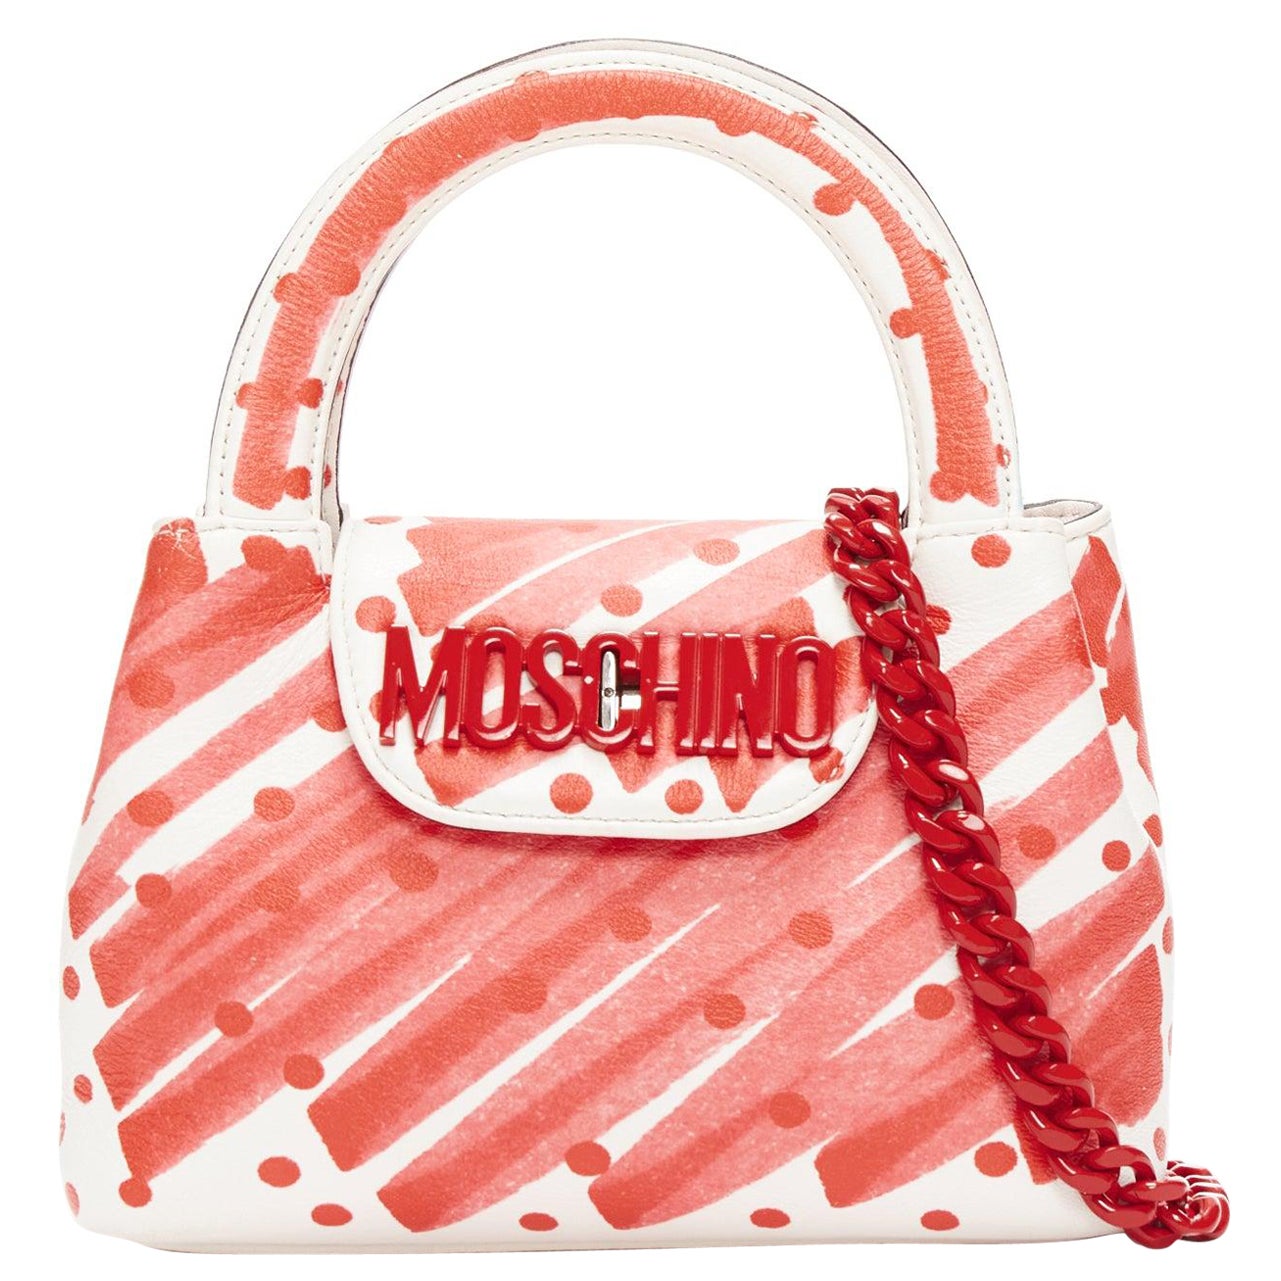 MOSCHINO Jeremy Scott 2019 Runway red white scribble marker crossbody bag For Sale